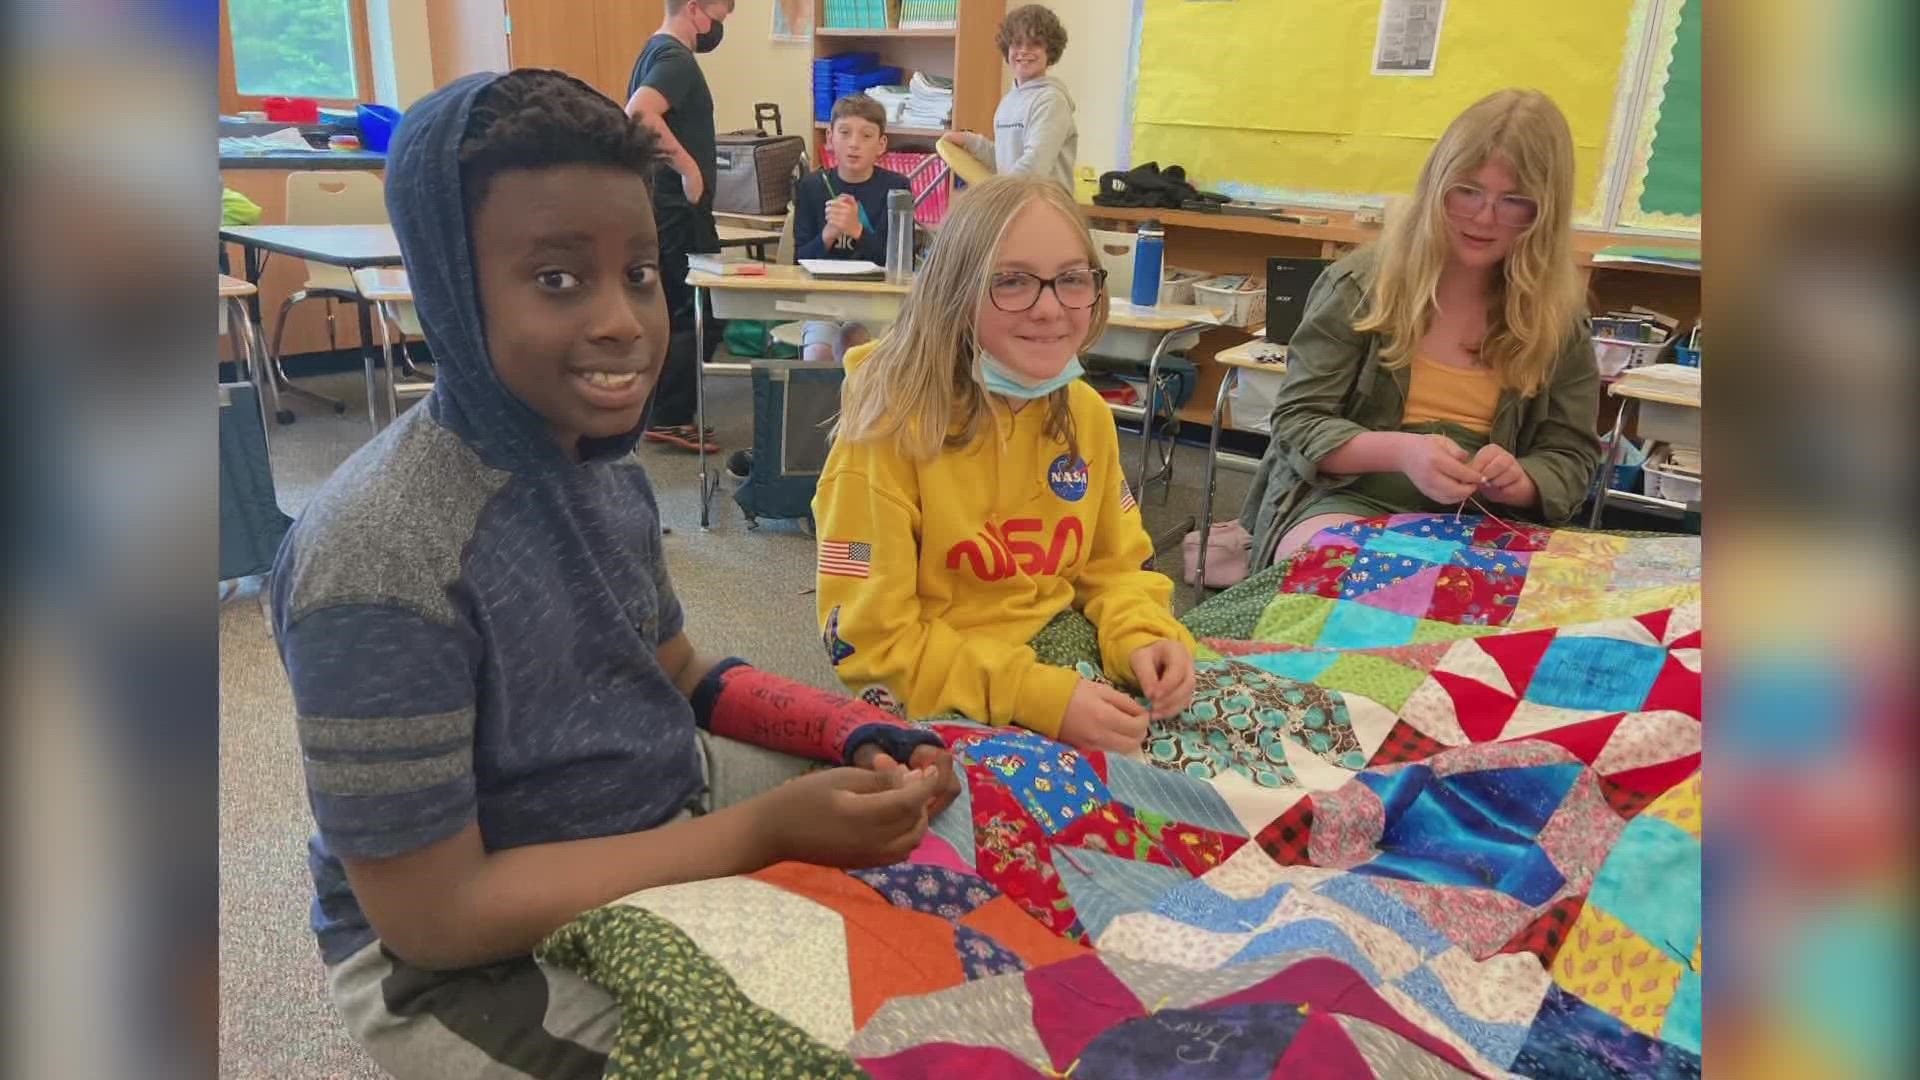 Students at the Wentworth School in Scarborough put their geometry lessons to work creating beautiful quilts to raise awareness about homelessness